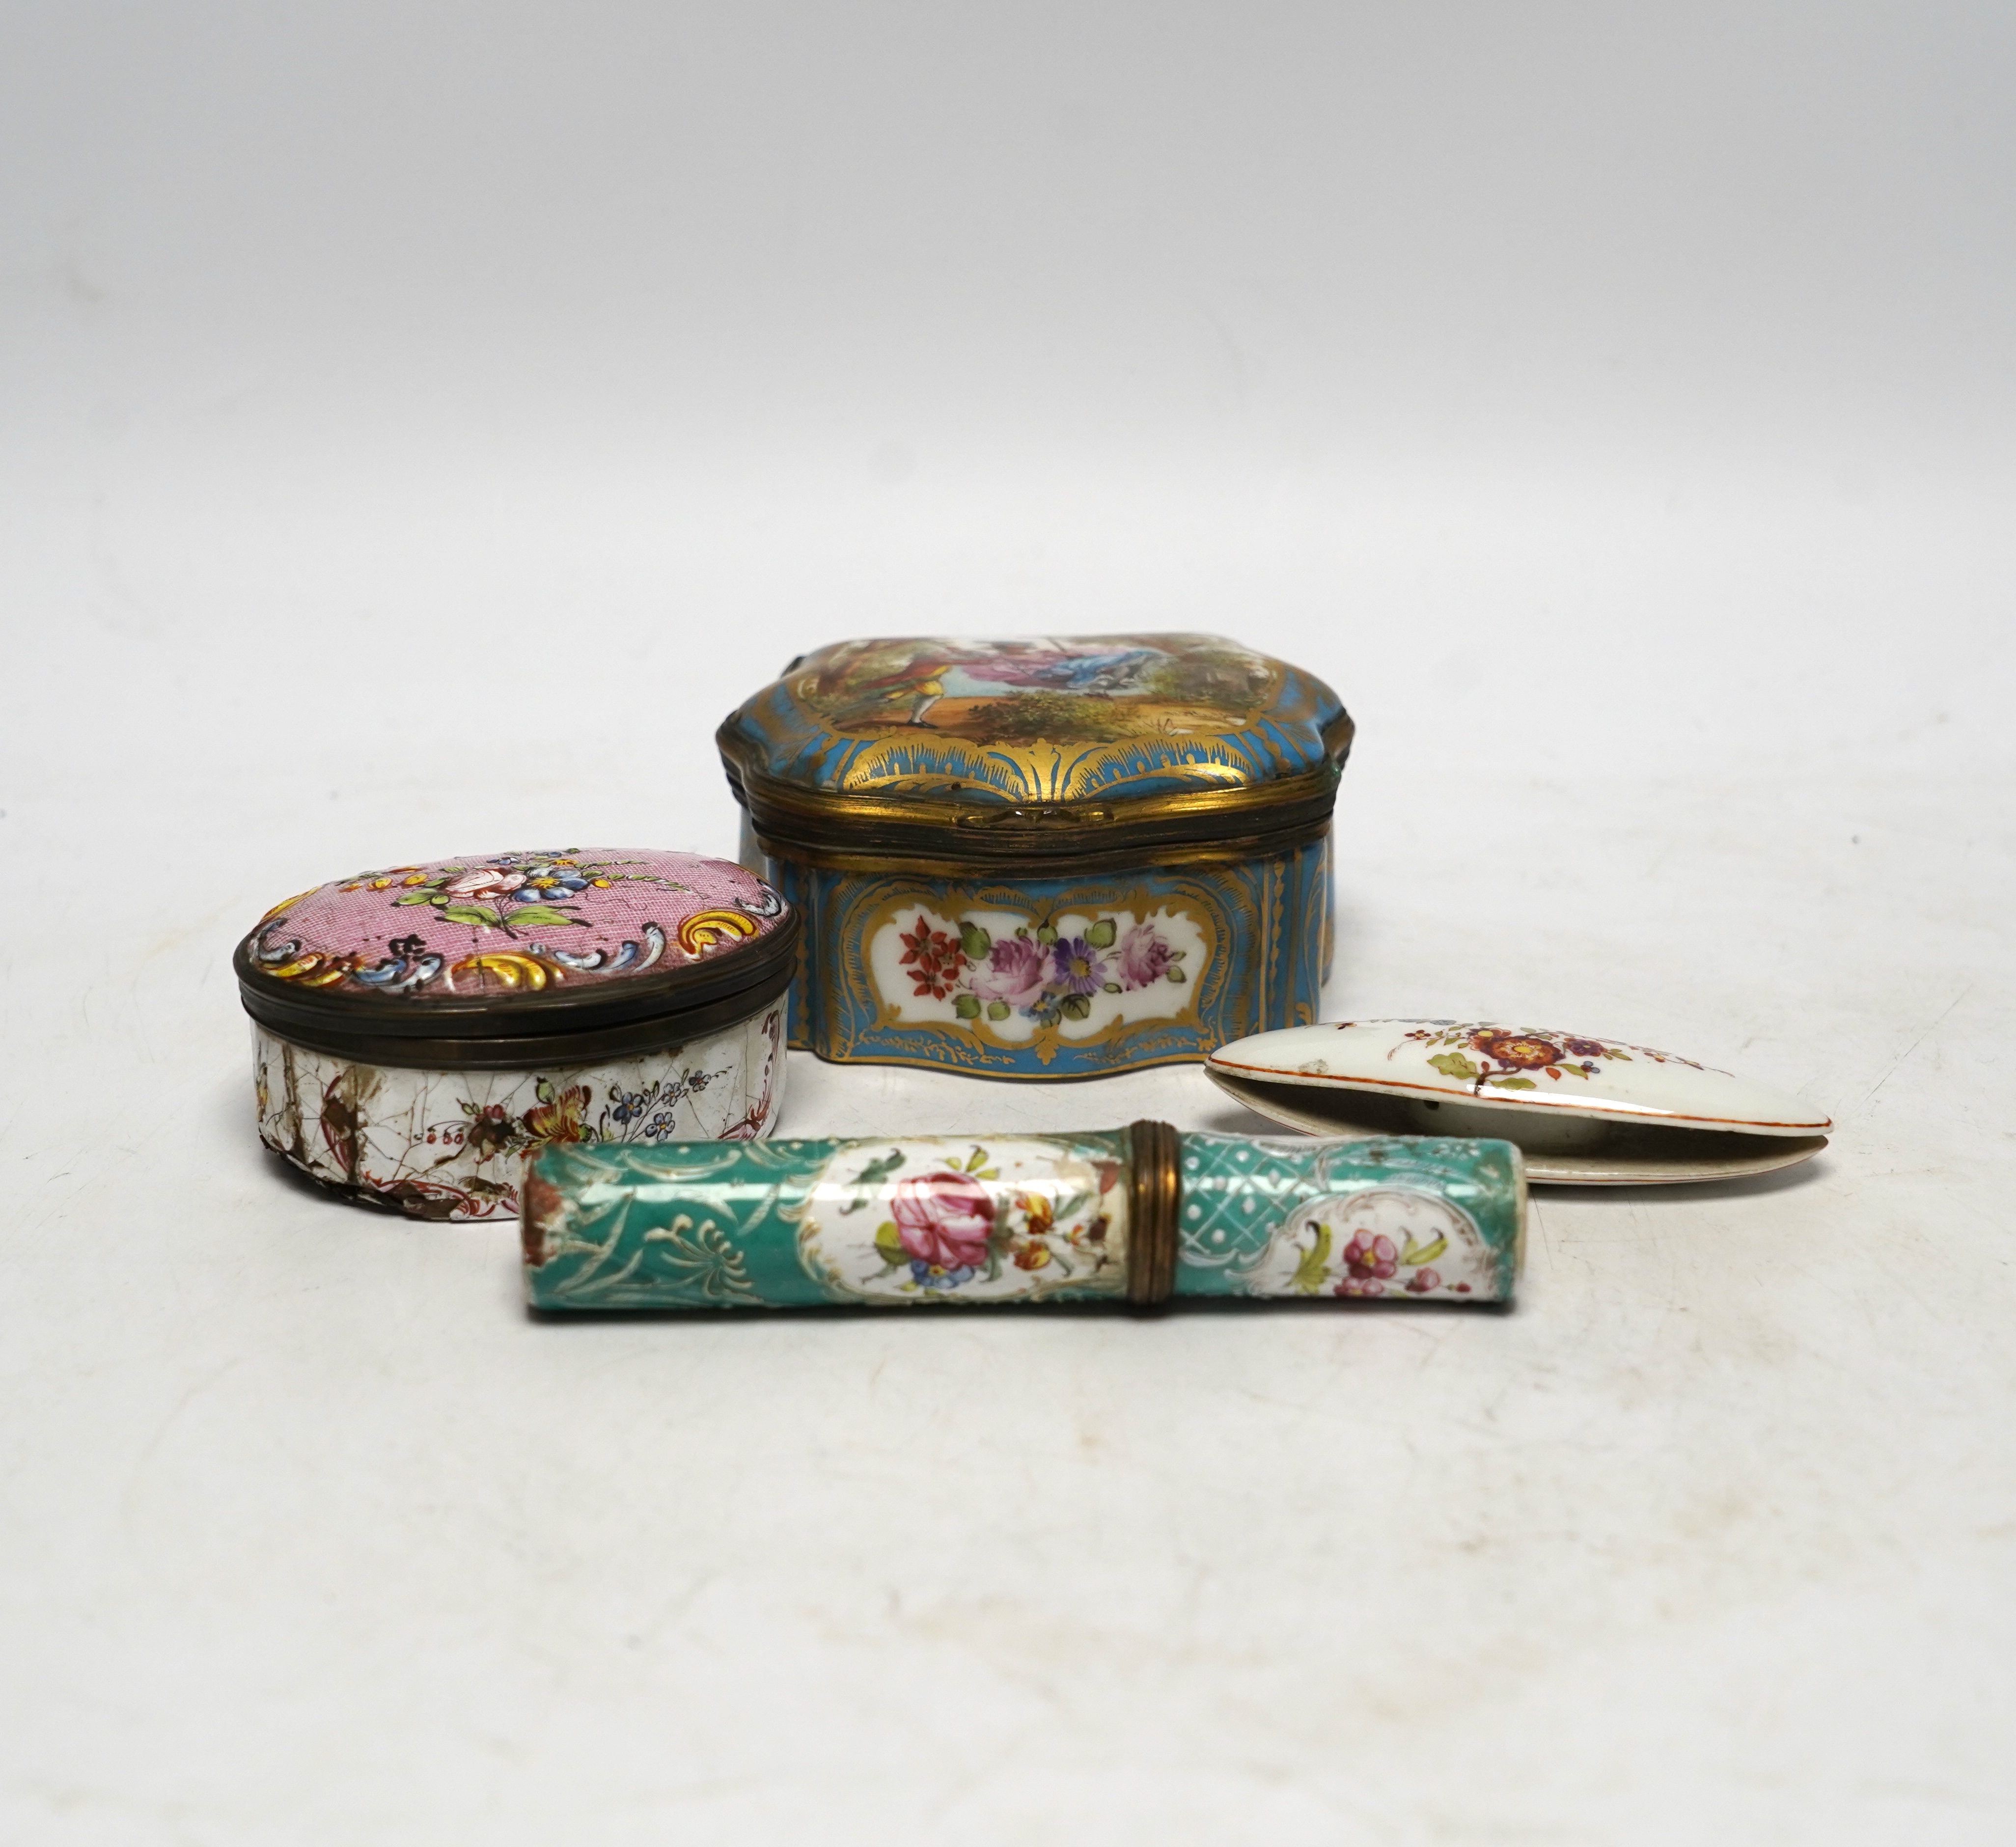 A South Staffordshire enamel bodkin case, 9cm wide, and three other enamel items; a patch box, thread holder and box with hinged cover.